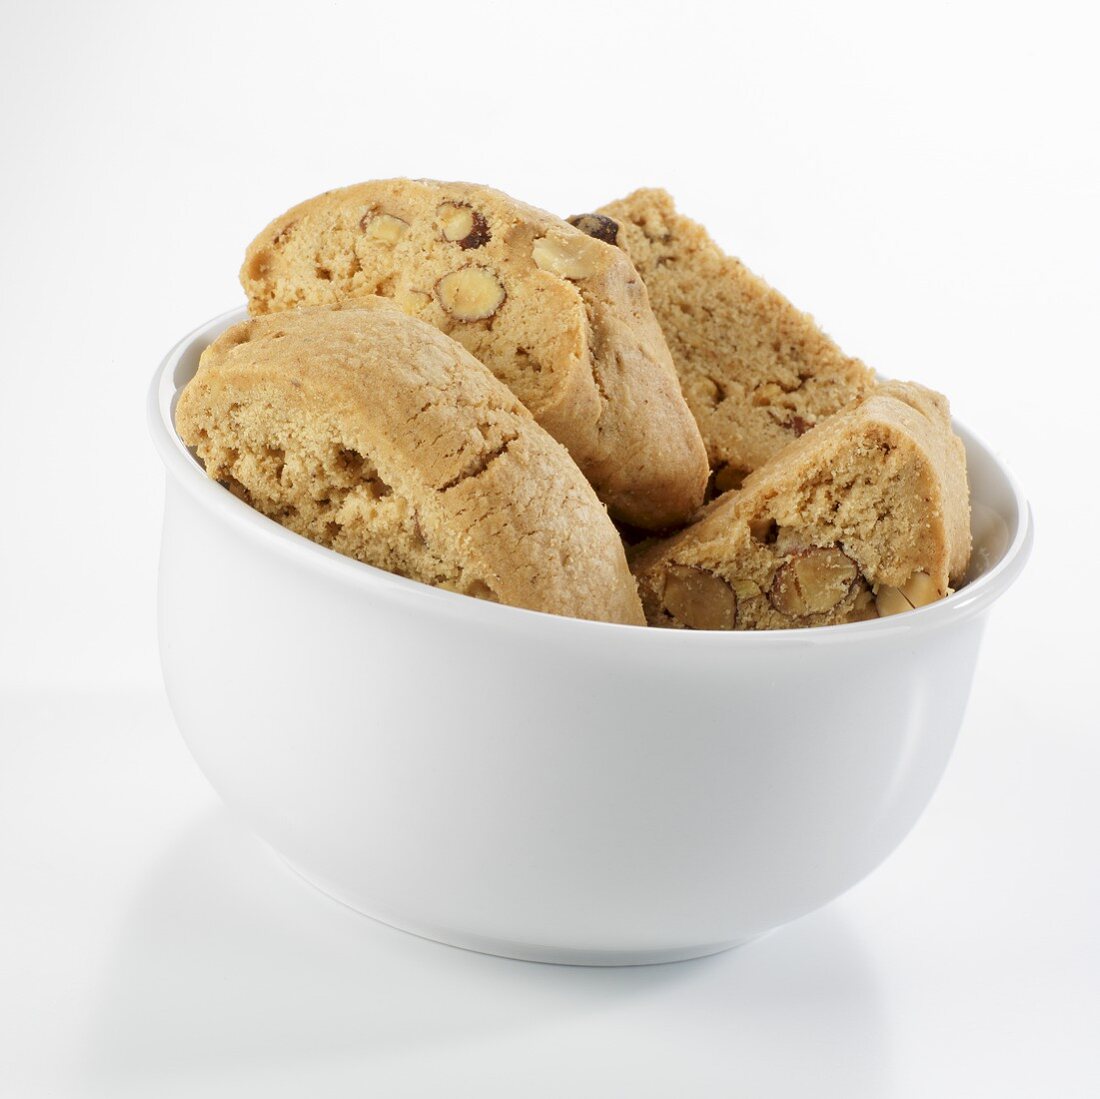 Greek almond biscuits in white bowl